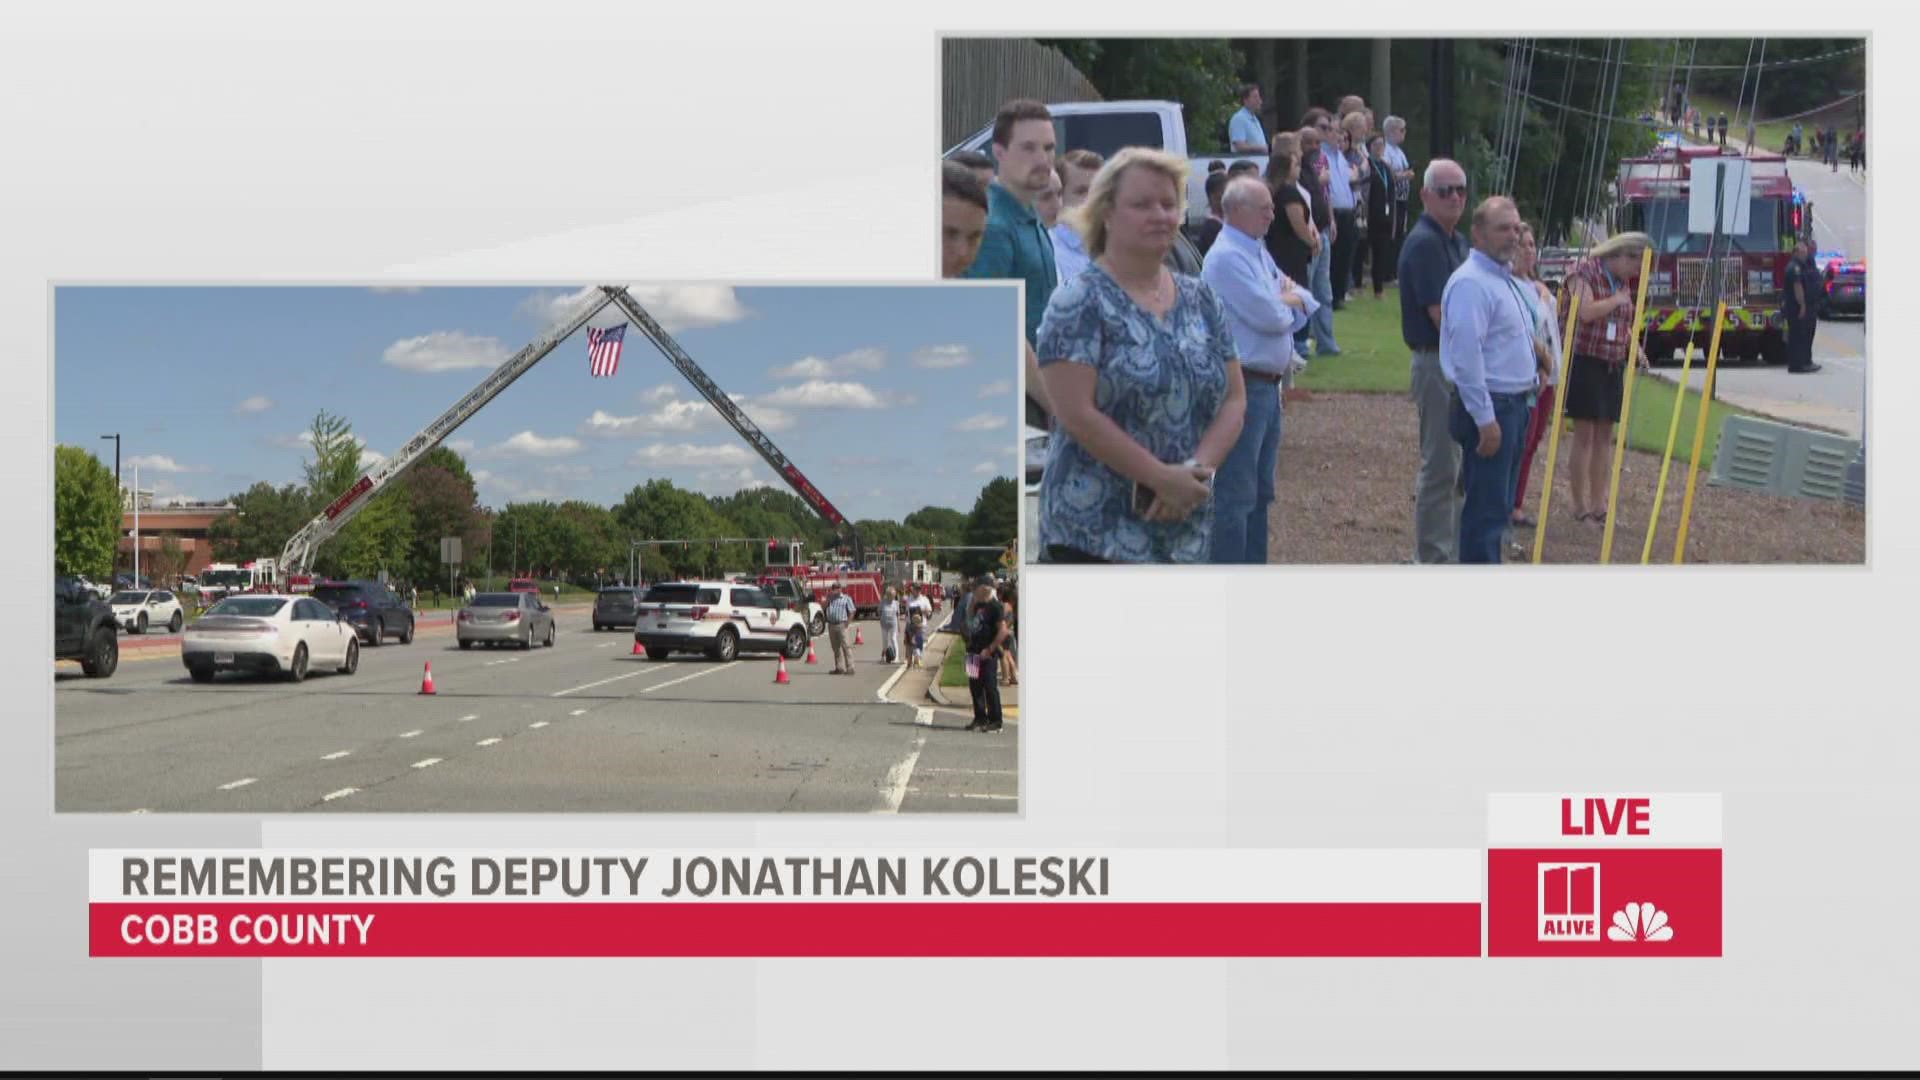 Koleski was a longtime deputy with the Cobb County Sheriff's Office, joining the agency in 2007.